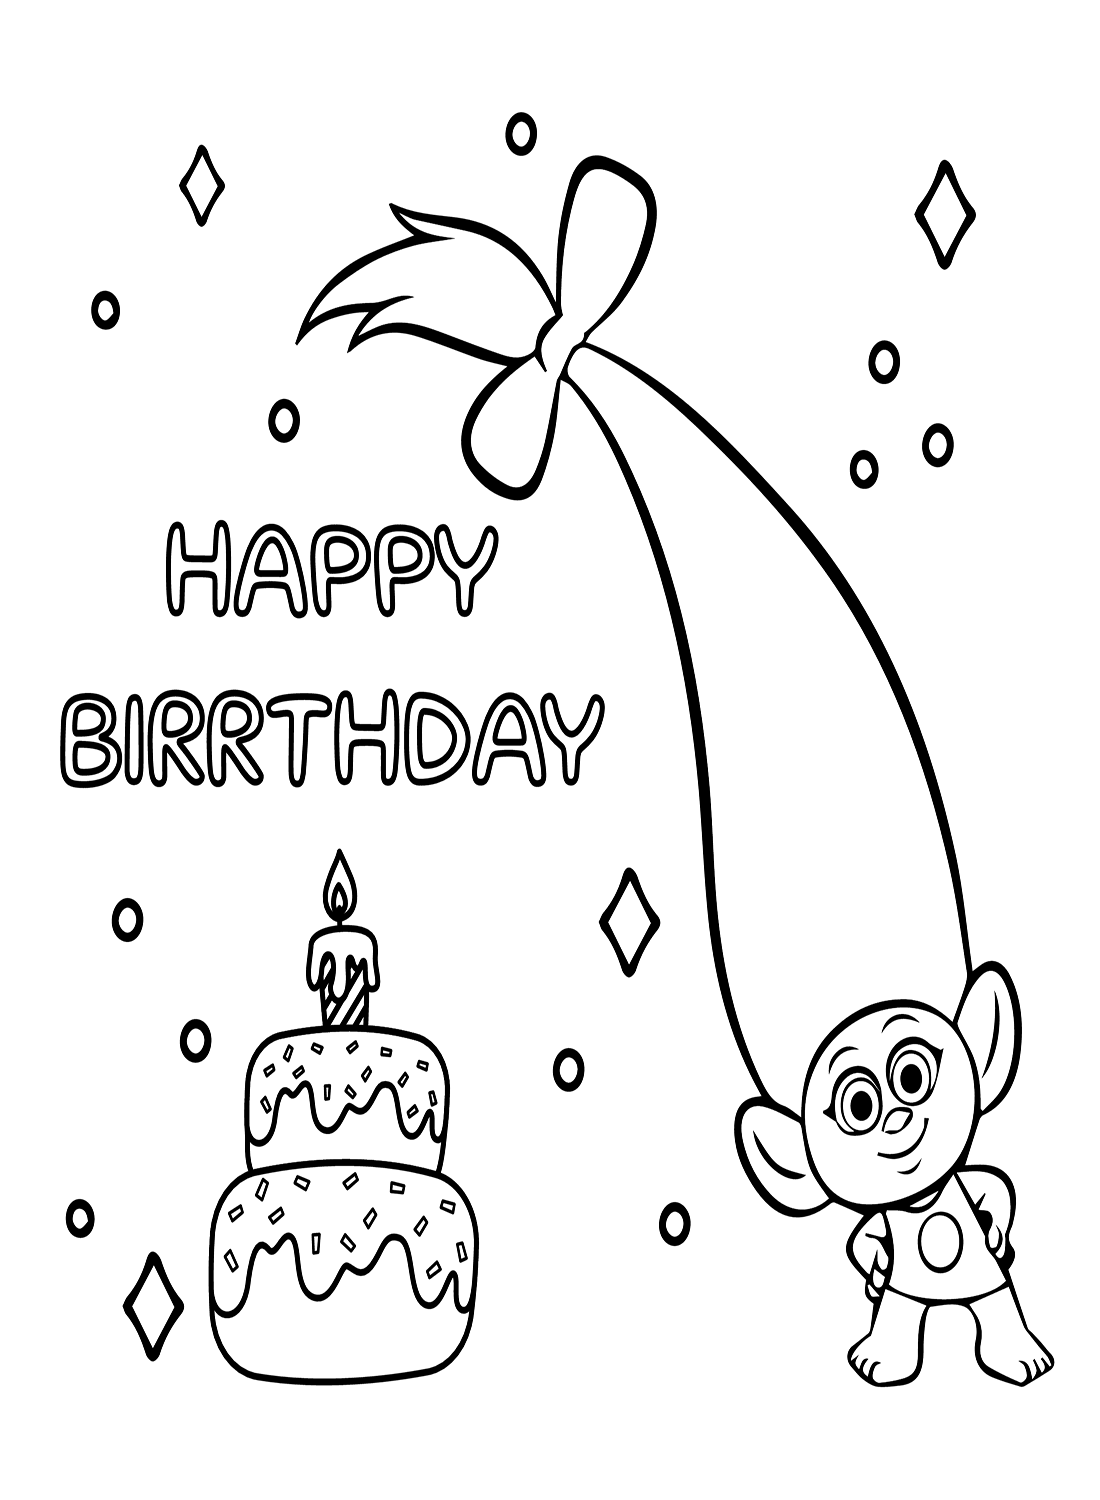 Trolls World Tour Images Coloring Page